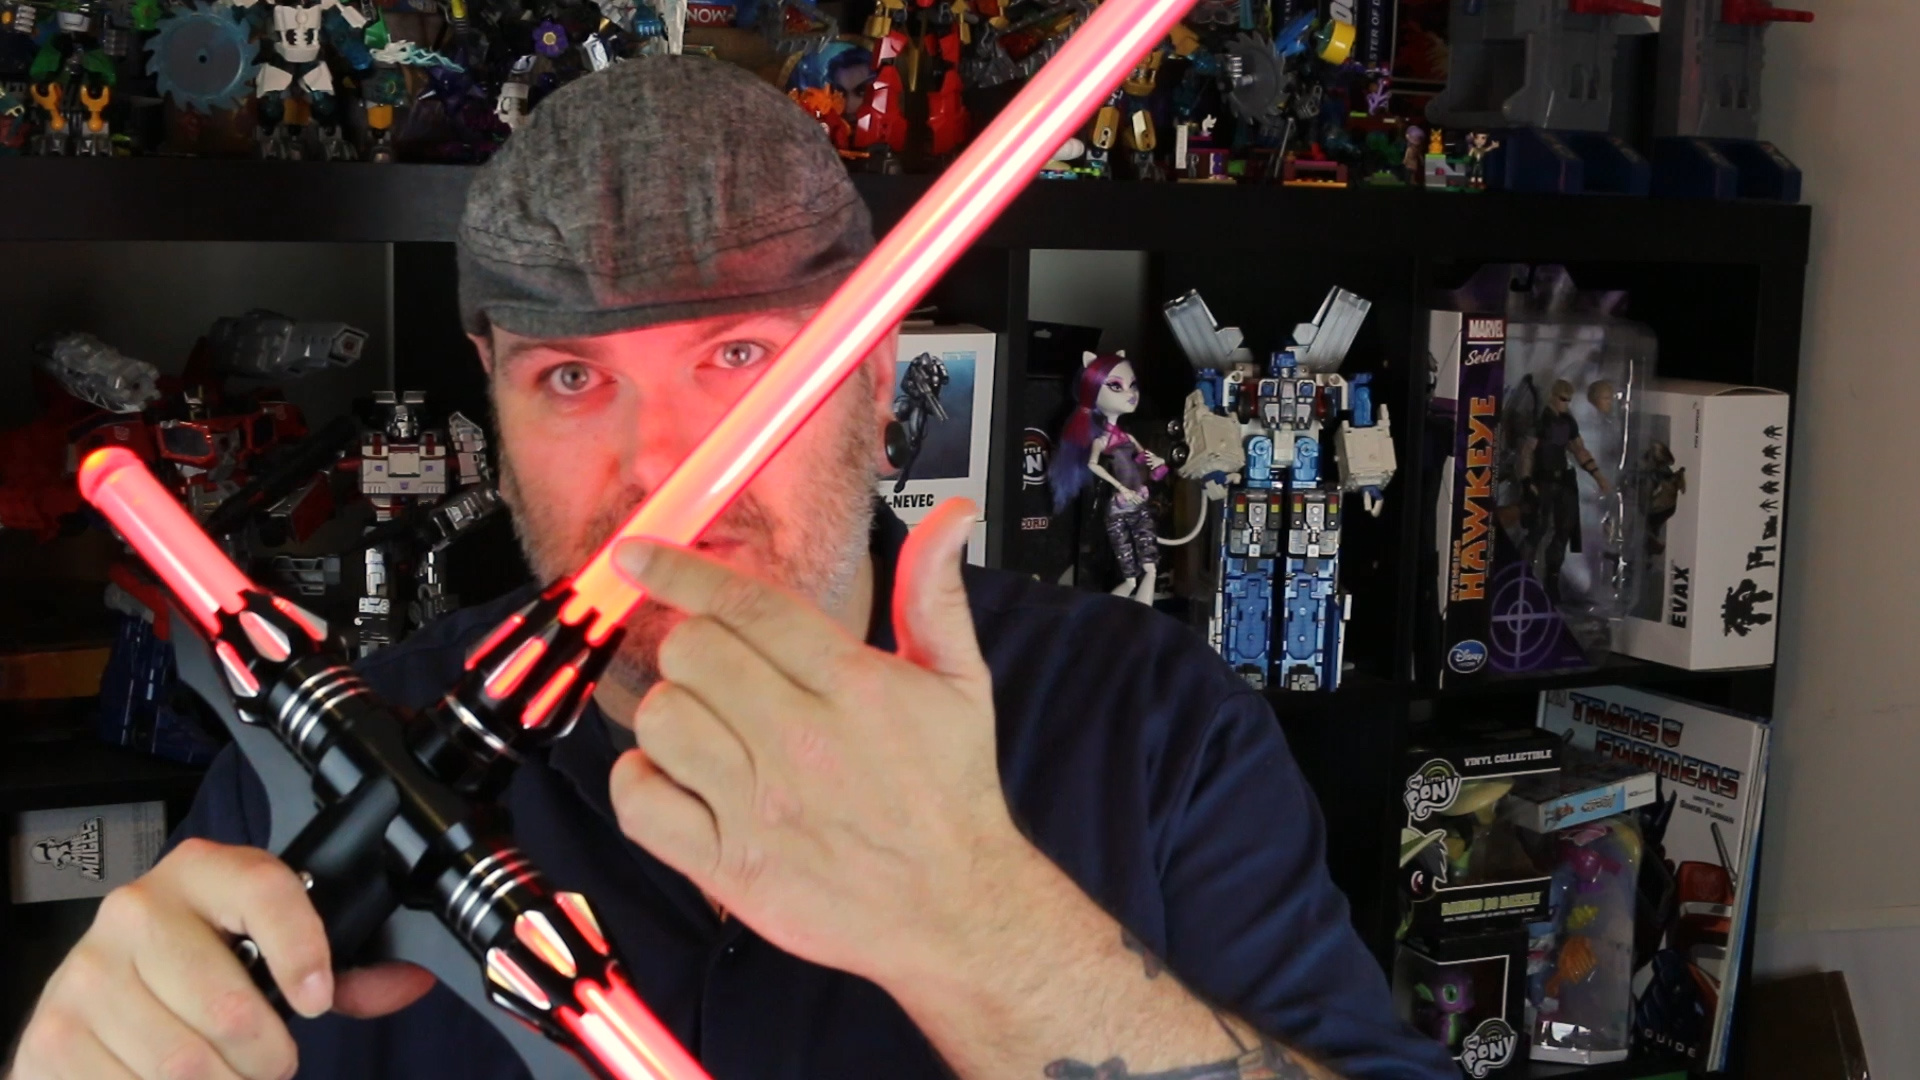 Toy Time Wields UltraSabers’ Renegade Combat Lightsaber